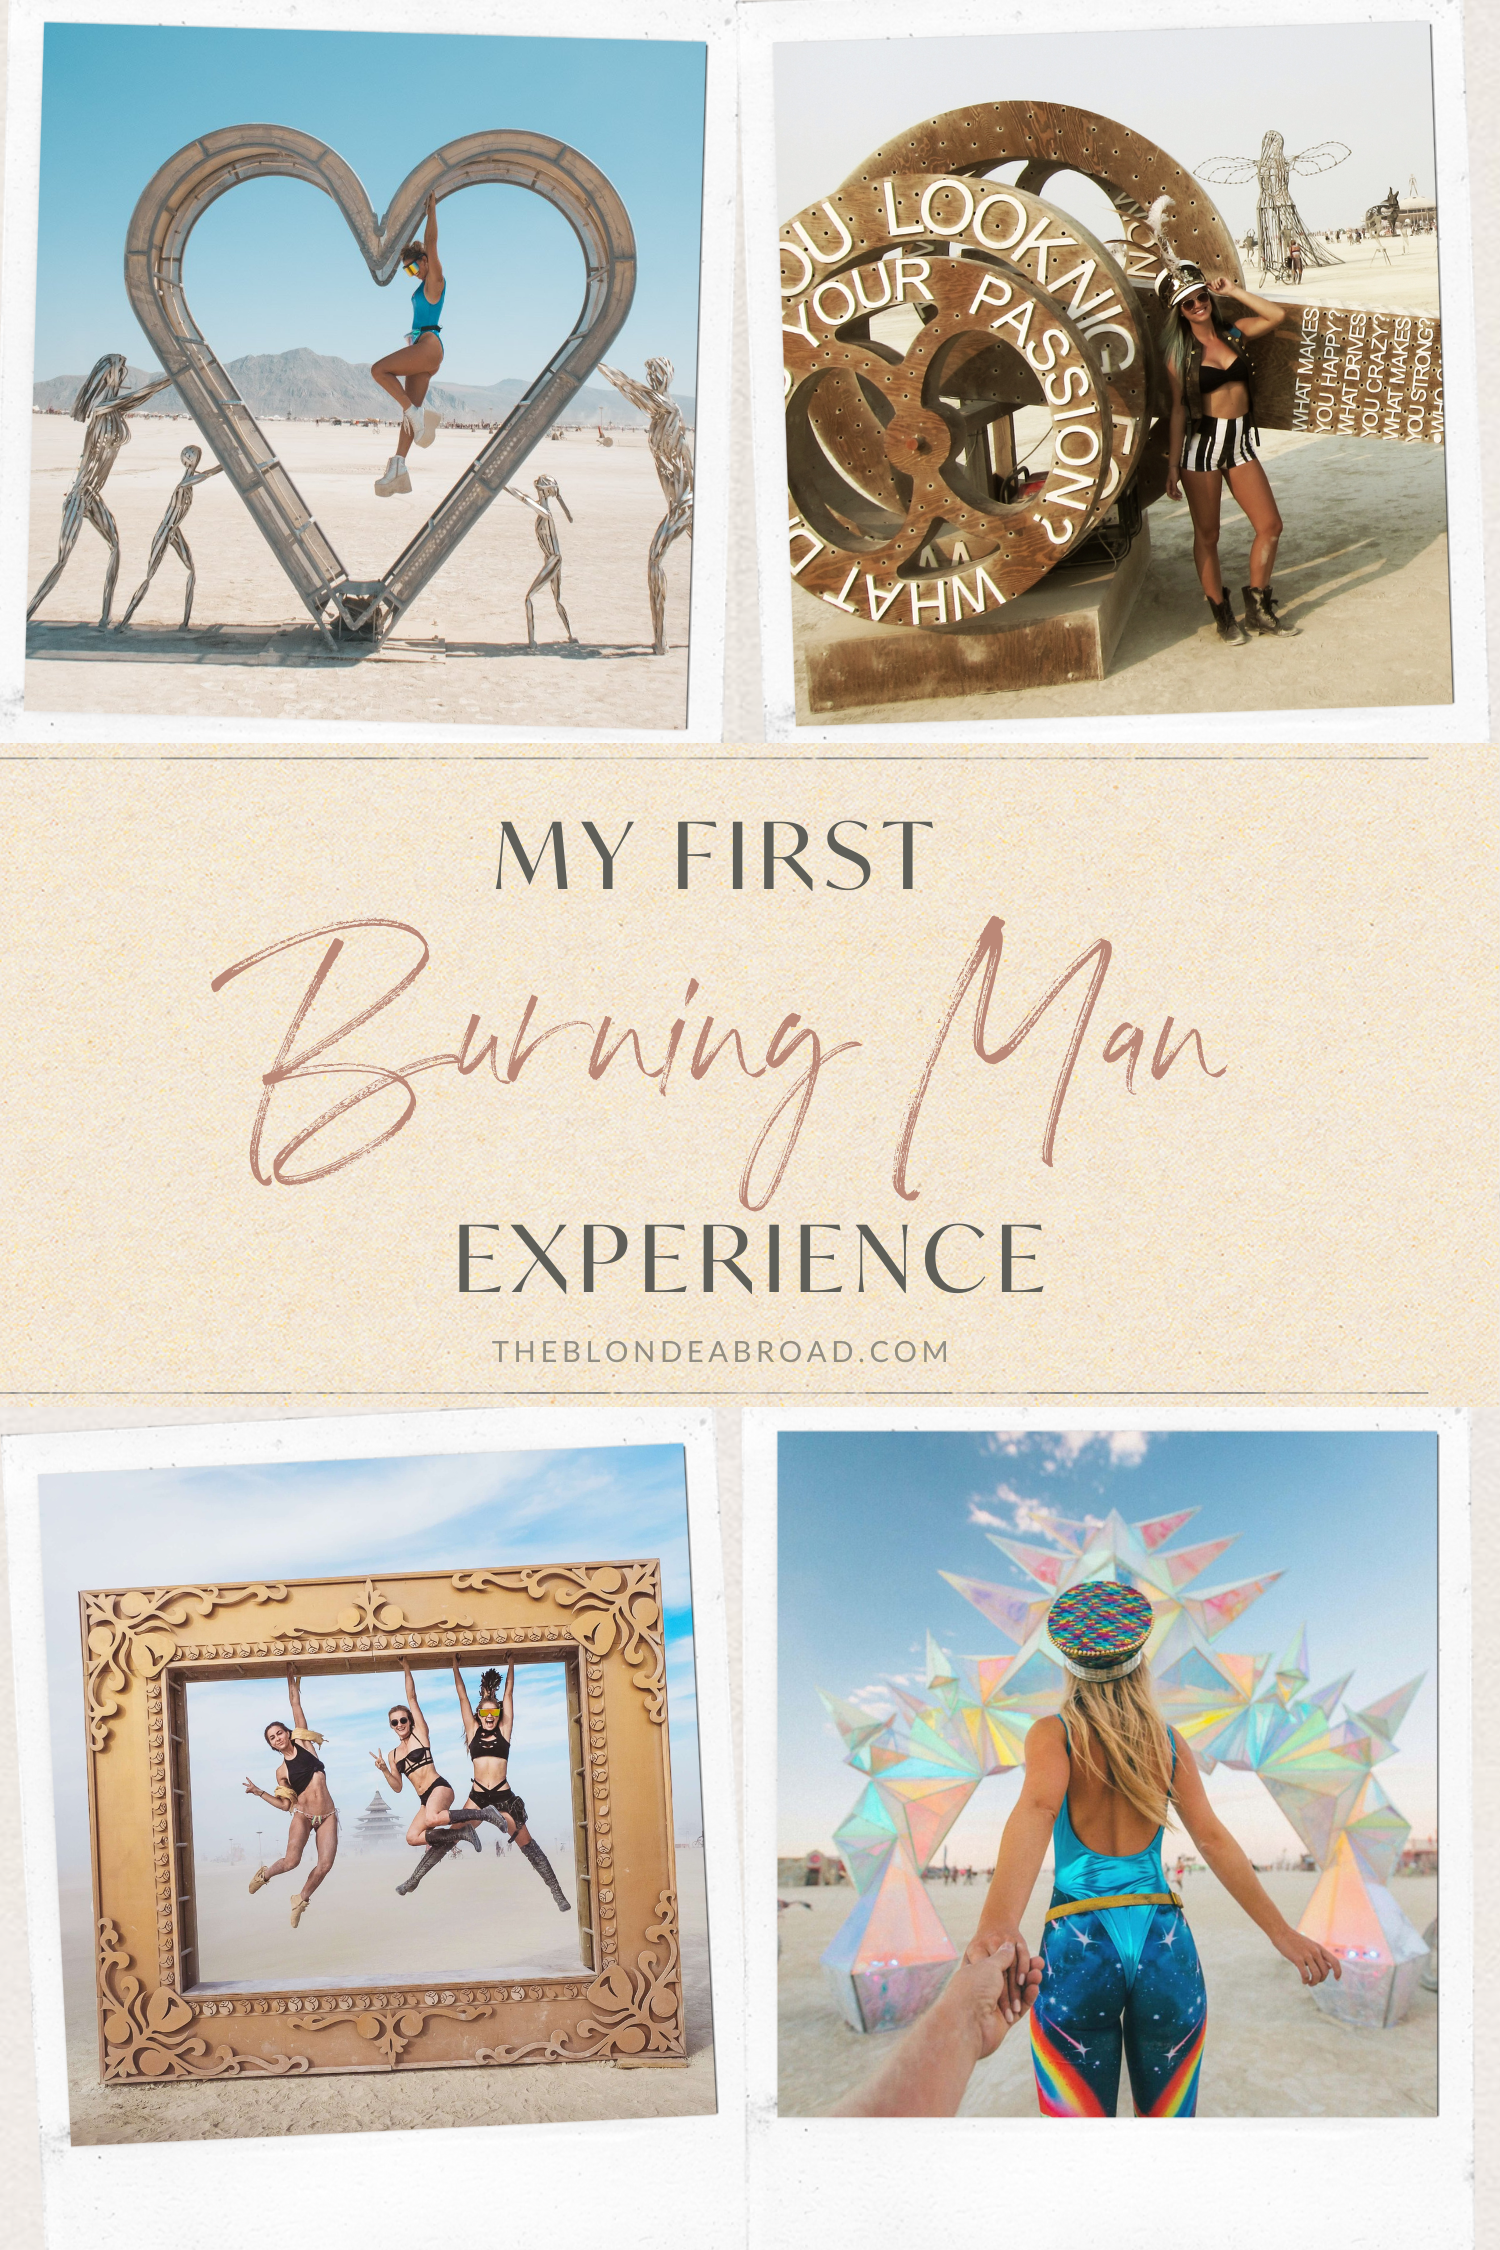 My First Burning Man Experience